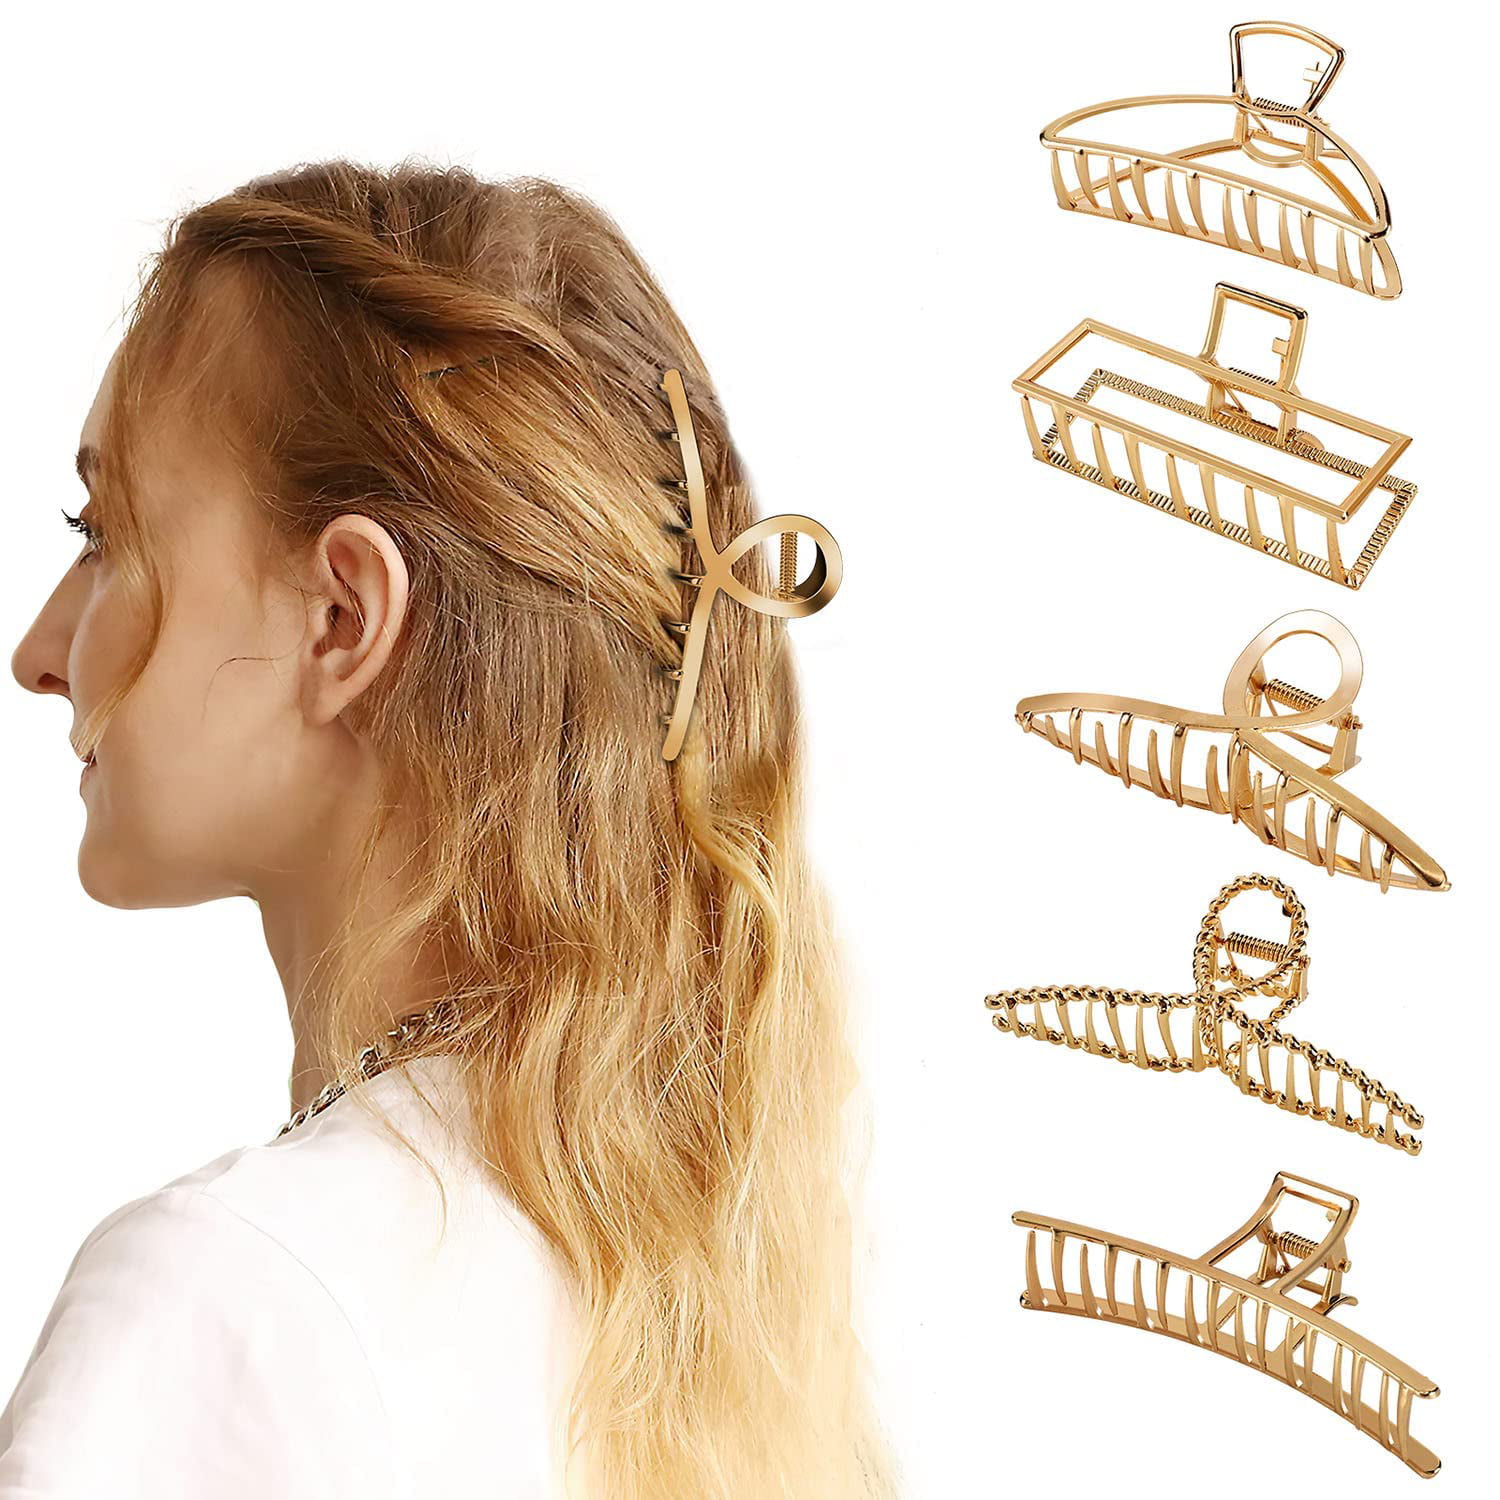 Women Large Acrylic Hair Claw Clips Barrette Crab Clamp Hairpin Hairdress HOT 